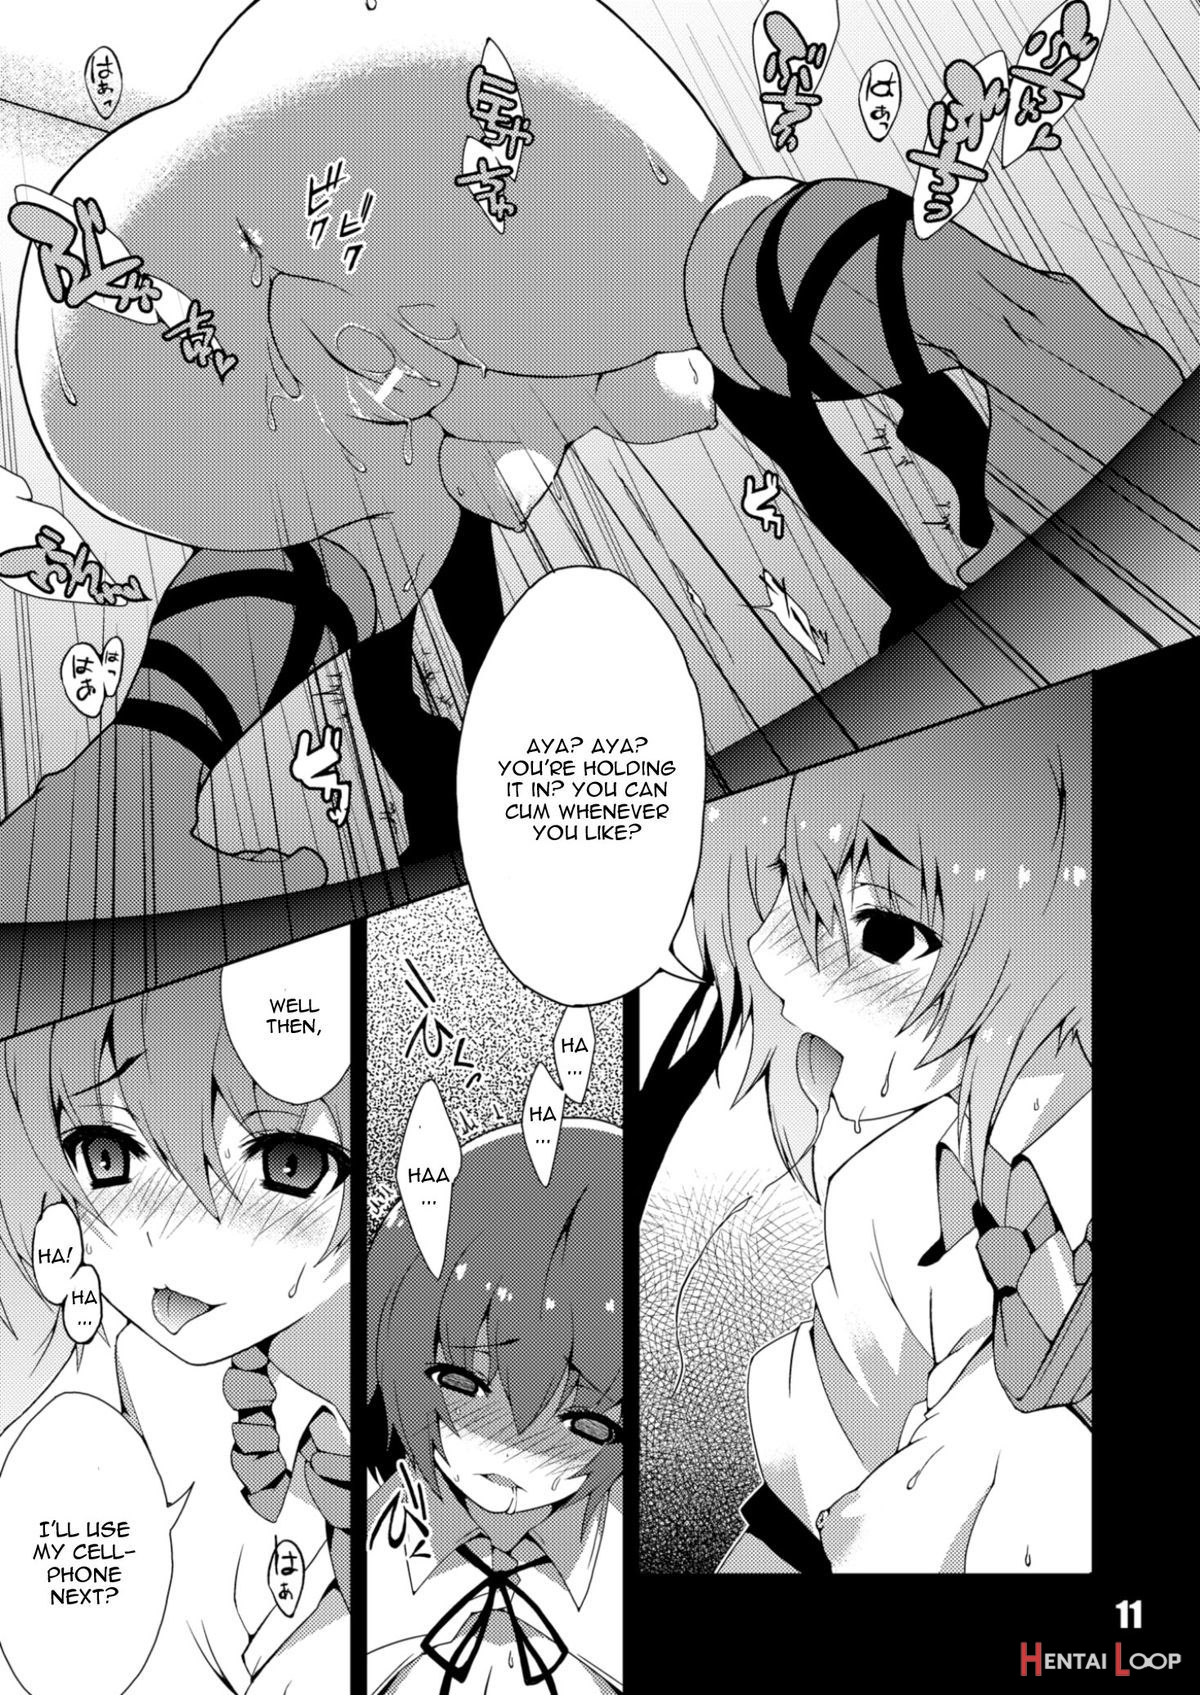 Kanojo No Ryuugi There Is No Such Thing As Light. page 11